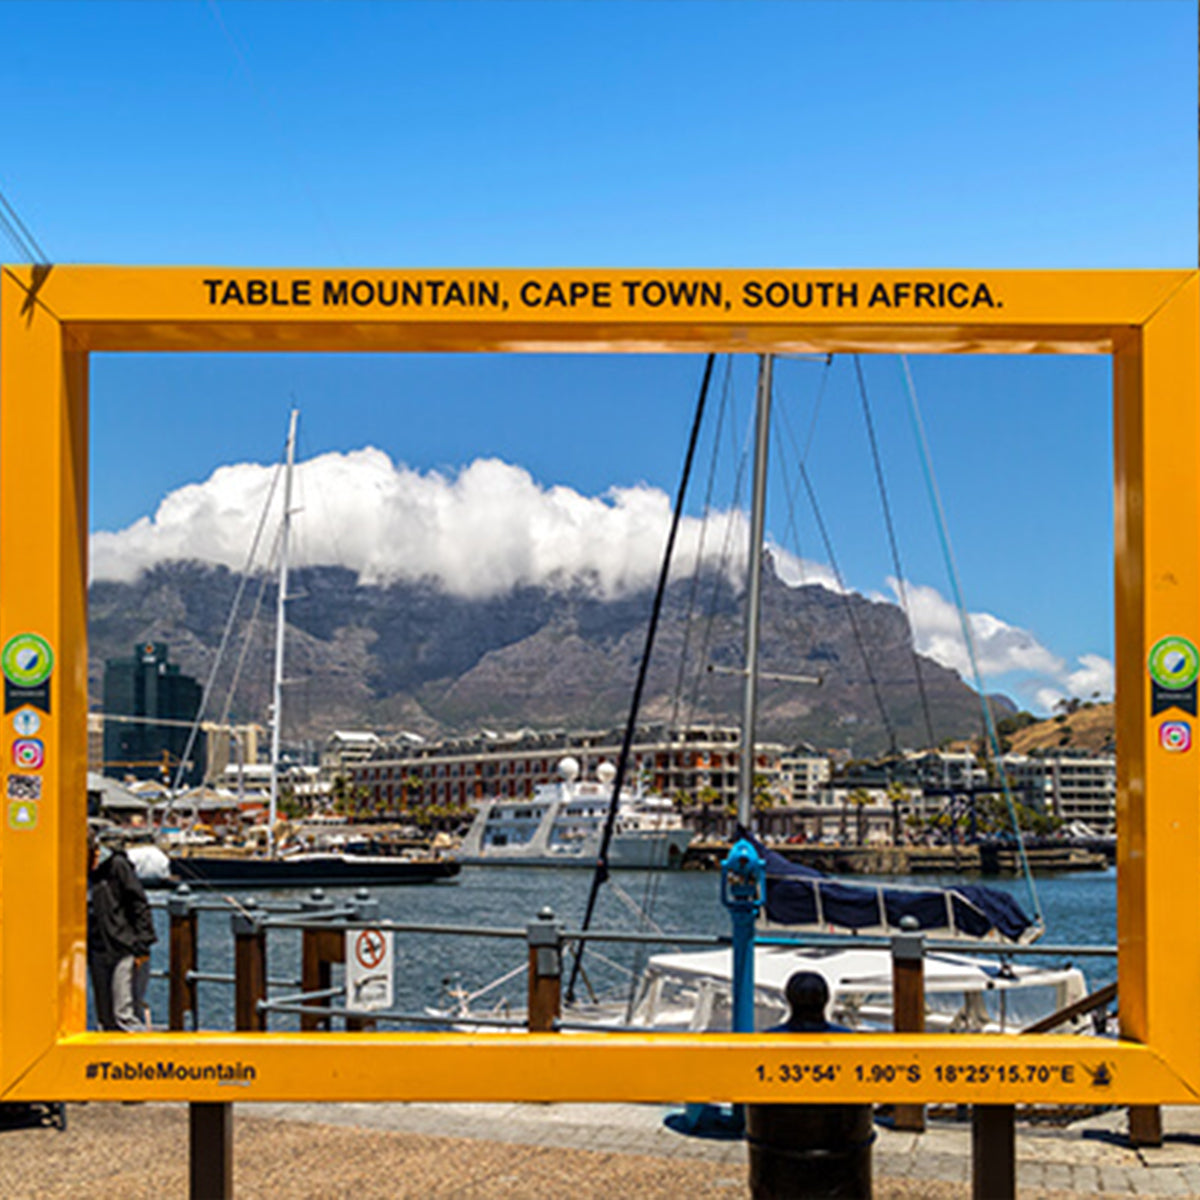 Photograph opportunity point with Table Mountain in the background